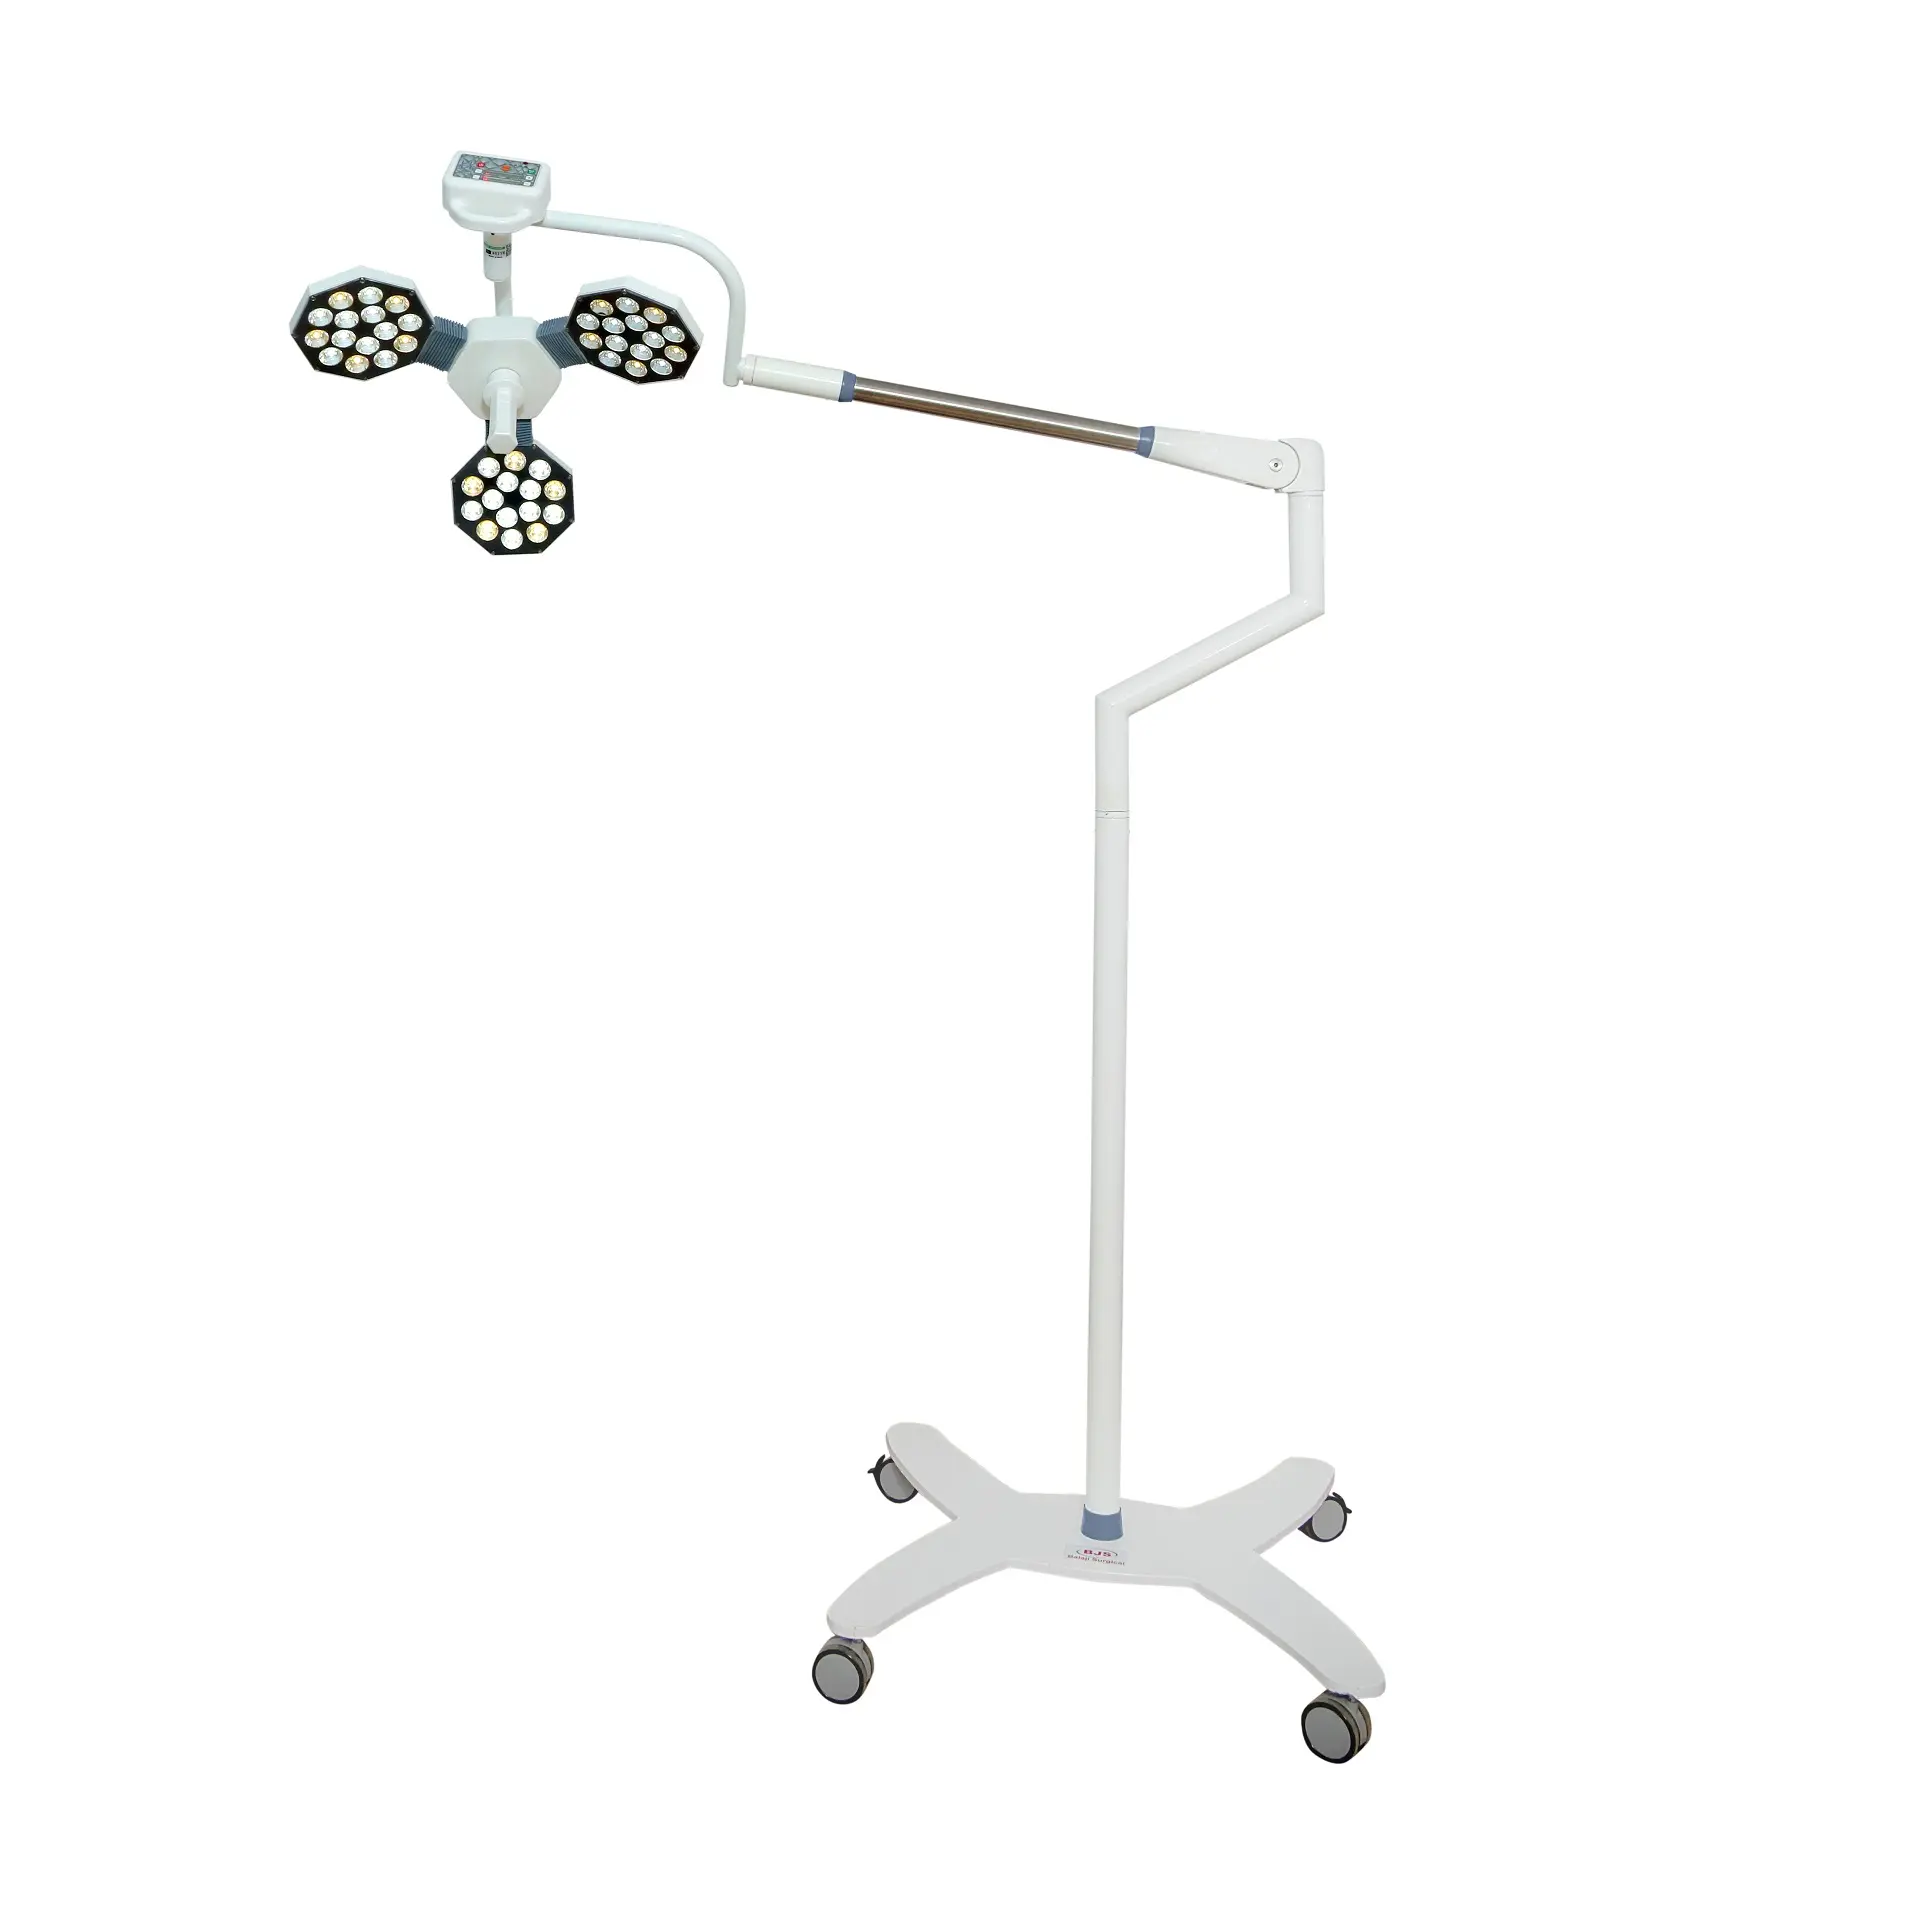 Luxury Modern Design Hex 3 Mobile Led Operation Theatre Light for Hospital Medical Available at Affordable Price